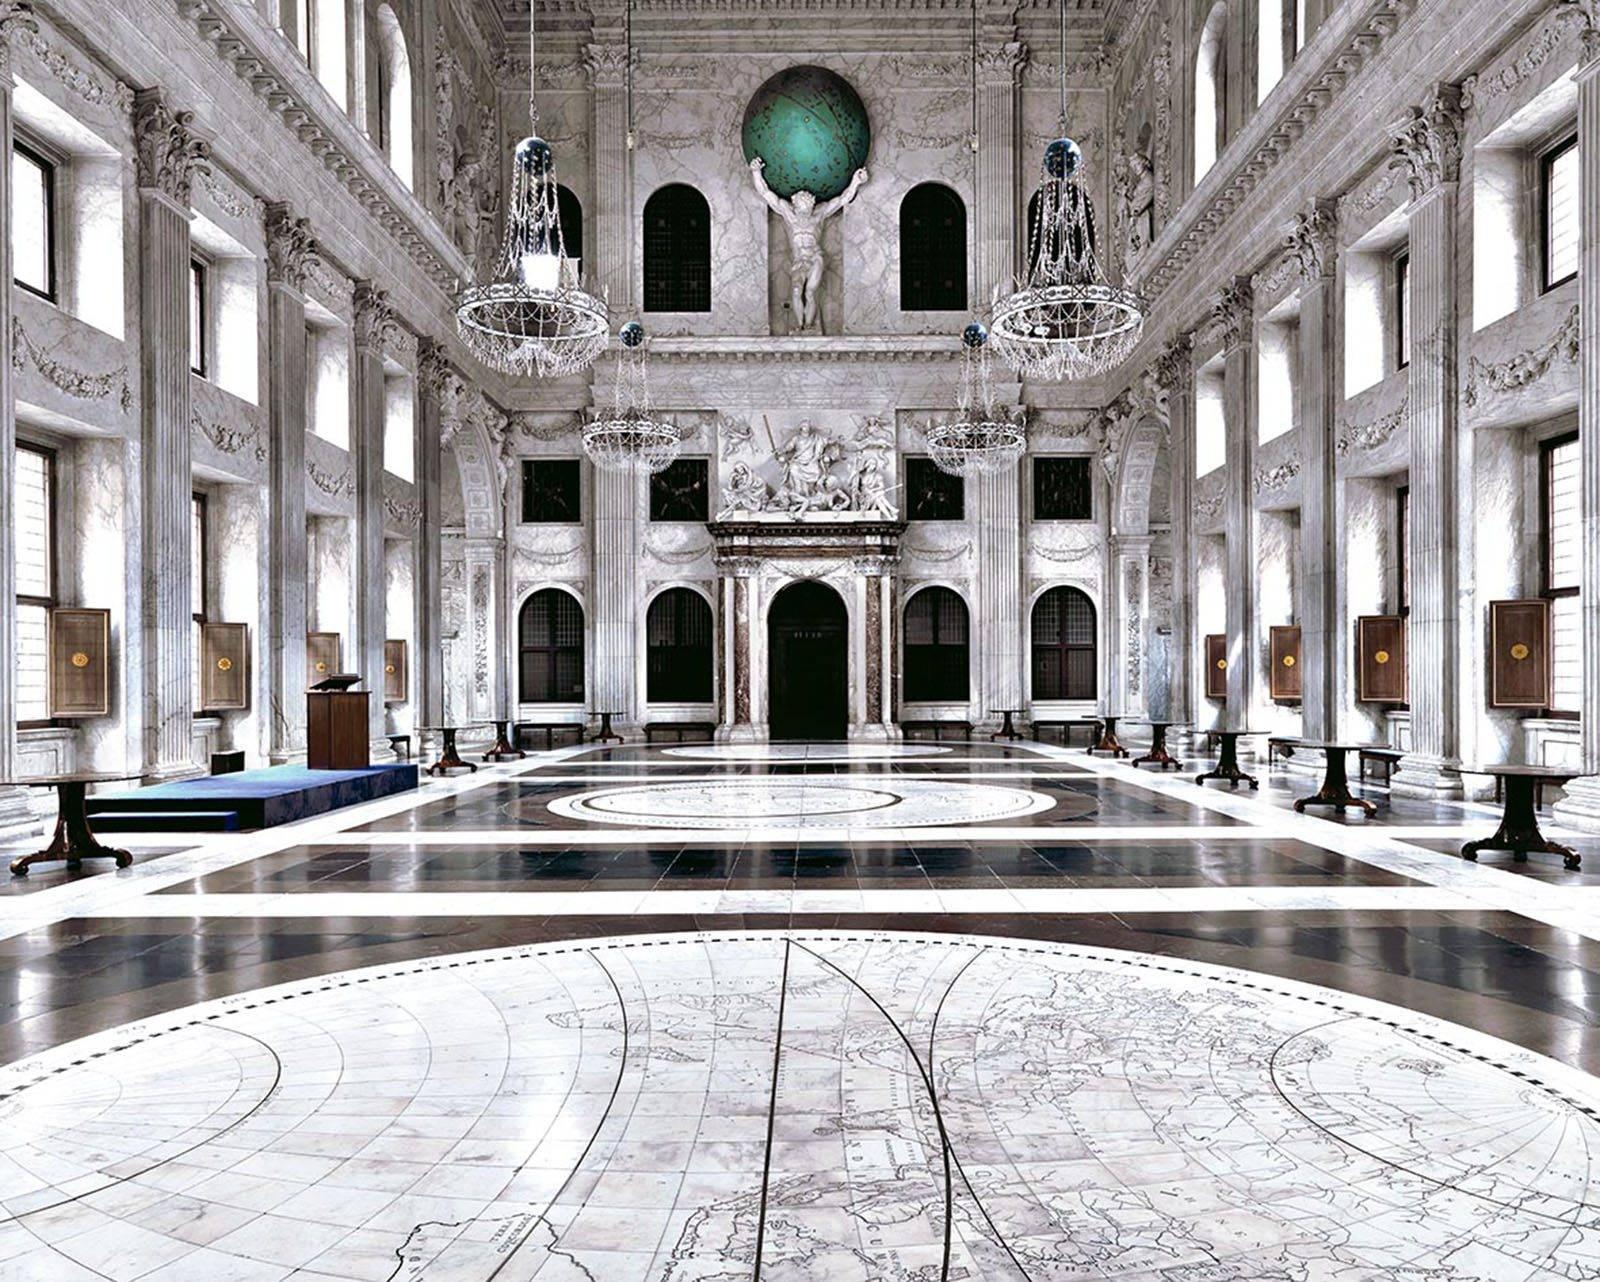 MASSIMO LISTRI
Palazzo Real II, Amsterdam (From the series Perspectives), 1992
C-print
Edition of 5
120 x 150 cm

39.5 x 47.5 inches  edition of 5
47.5 x 59 inches  edition of 5
71 x 88.5 inches  edition of 5

Framing options also available 

The